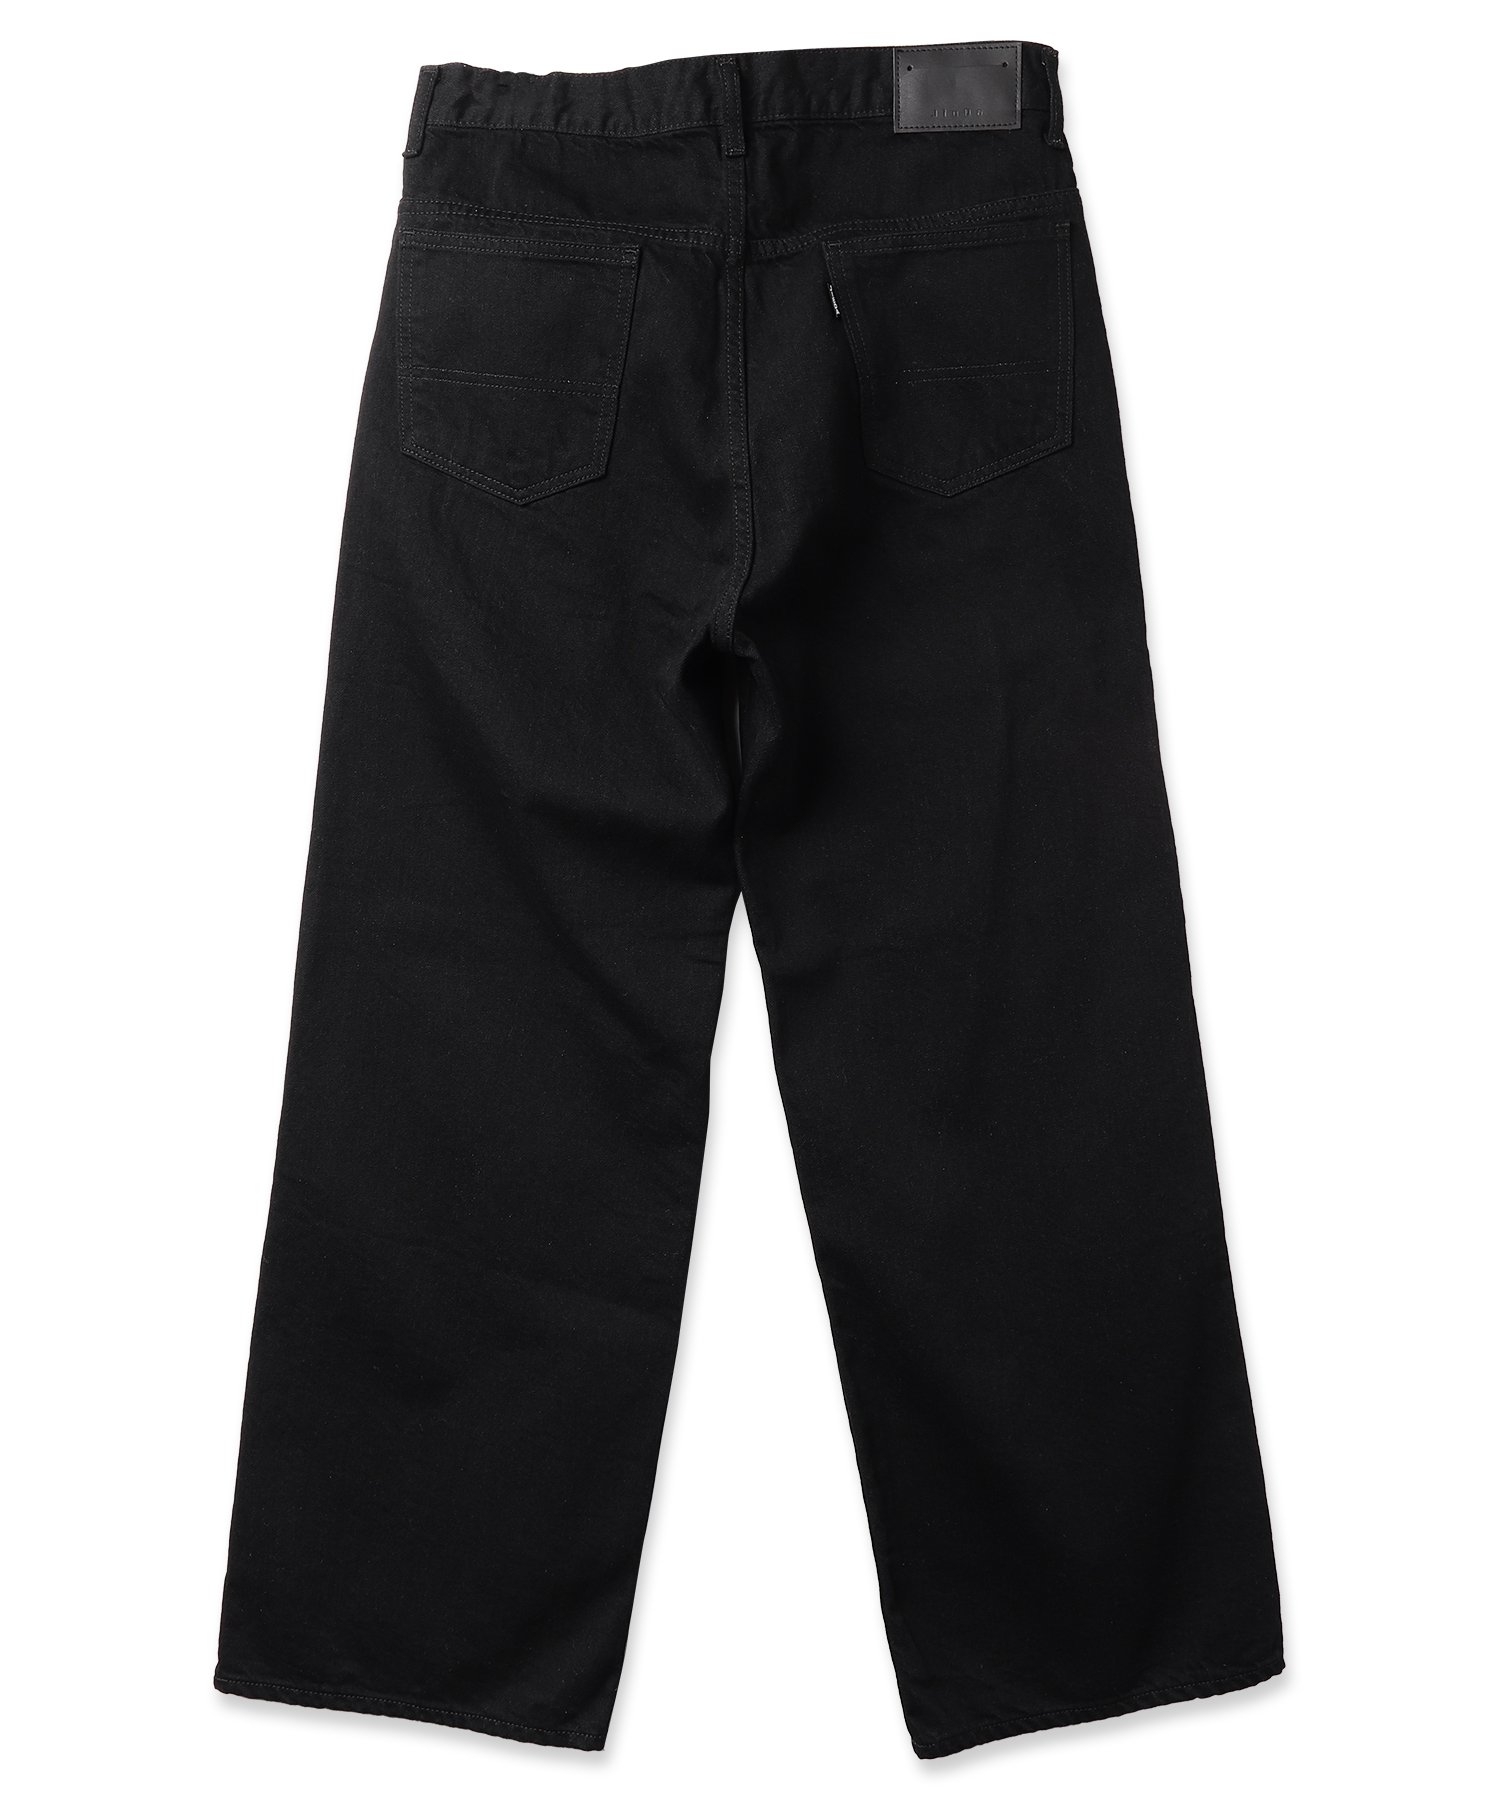 JieDa<br />LOOSE FIT DENIM / BLACK<img class='new_mark_img2' src='https://img.shop-pro.jp/img/new/icons14.gif' style='border:none;display:inline;margin:0px;padding:0px;width:auto;' />